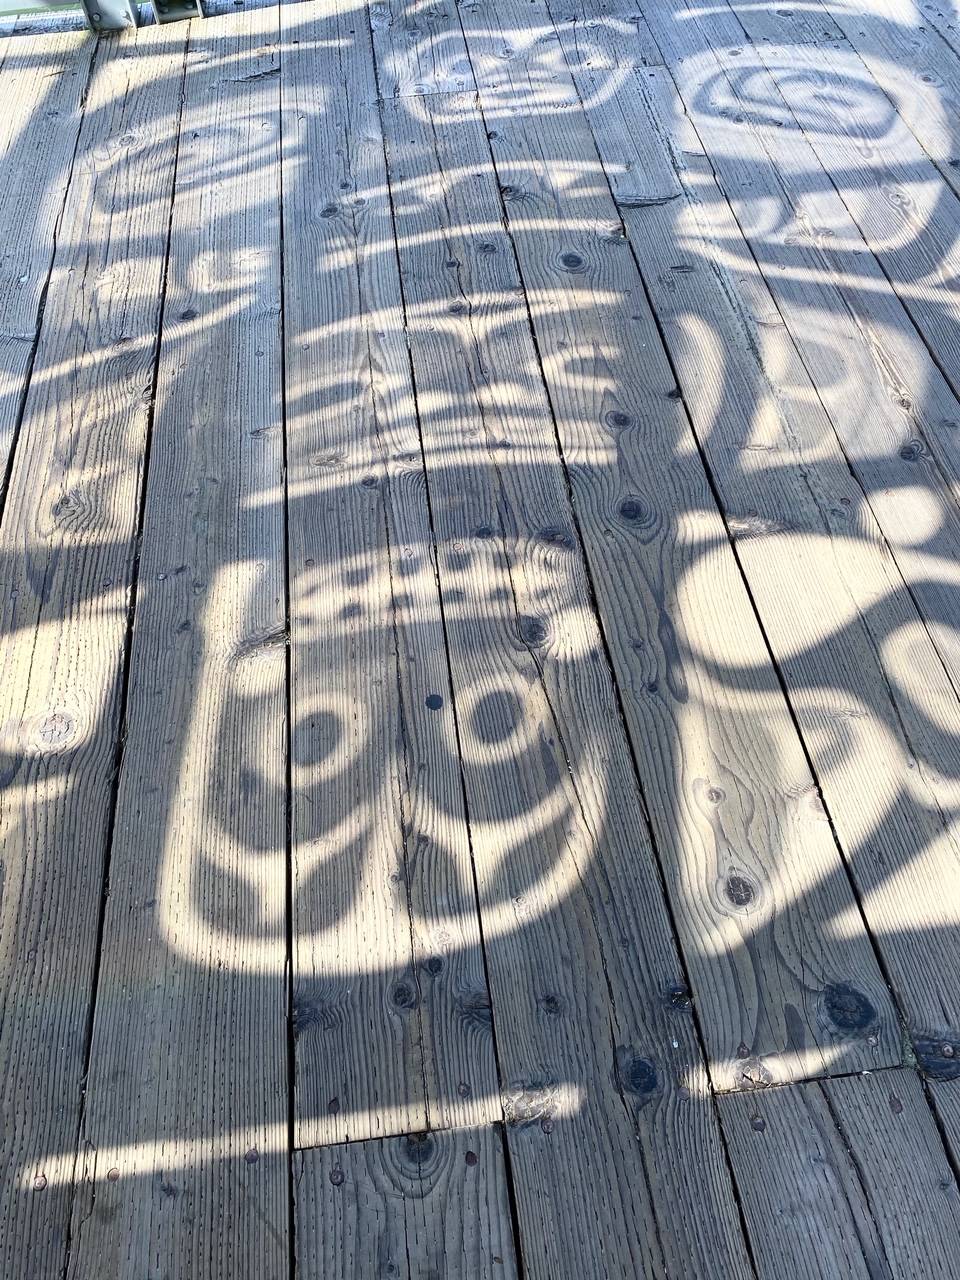 The sun, shines through a glass panel, duplicating the panel’s Tlingit design onto the downtown sea walk on July 28, 2020. (Courtesy Photo / Denise Carroll)